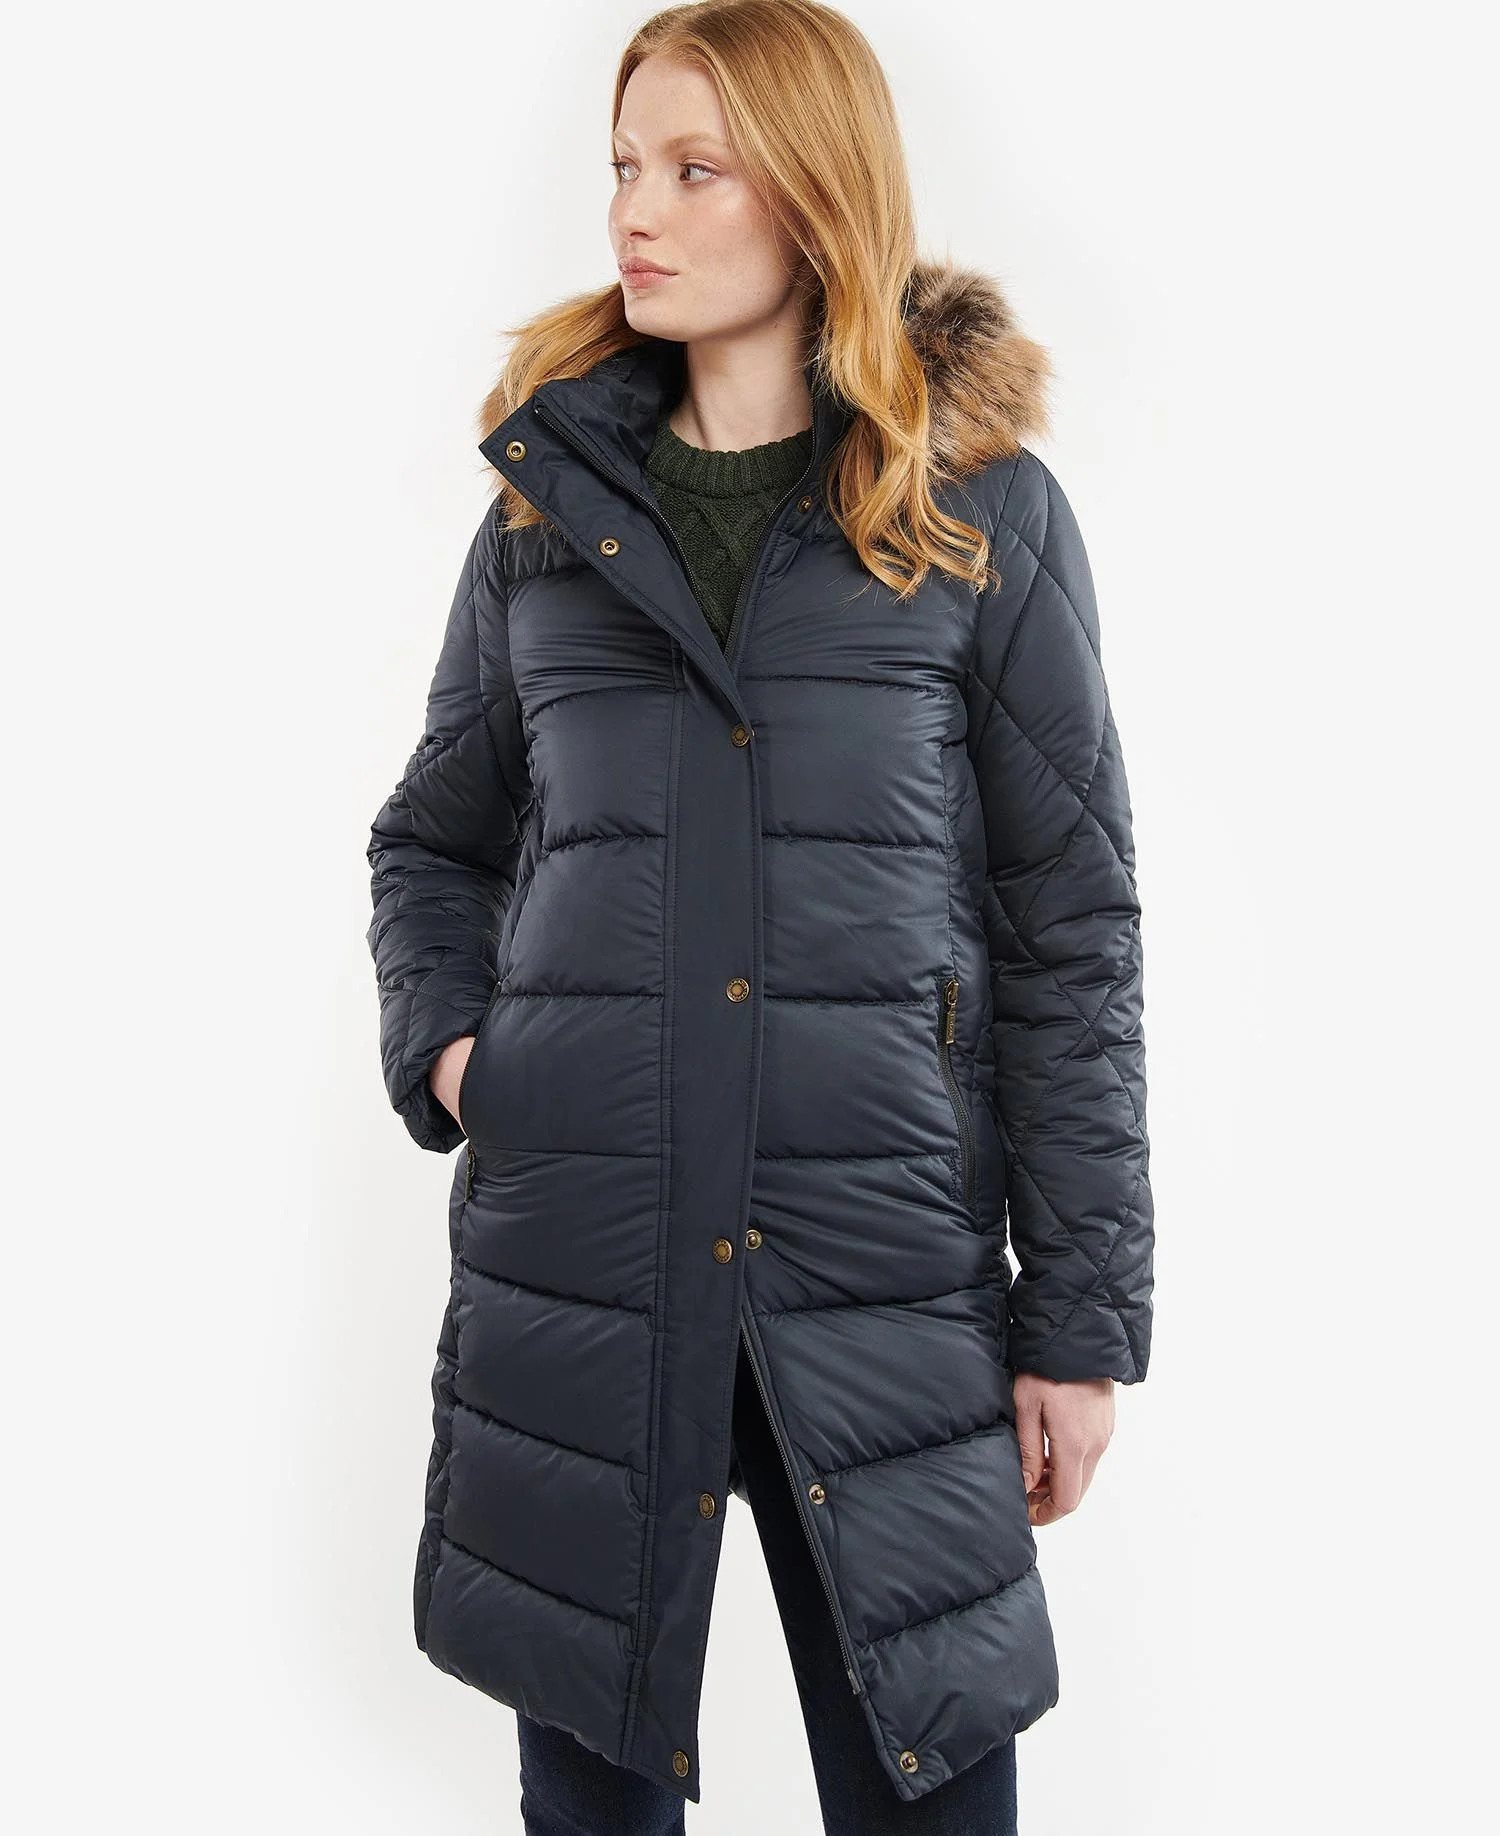 Barbour Daffodil Ladies Quilted Jacket - Robinsons Equestrian